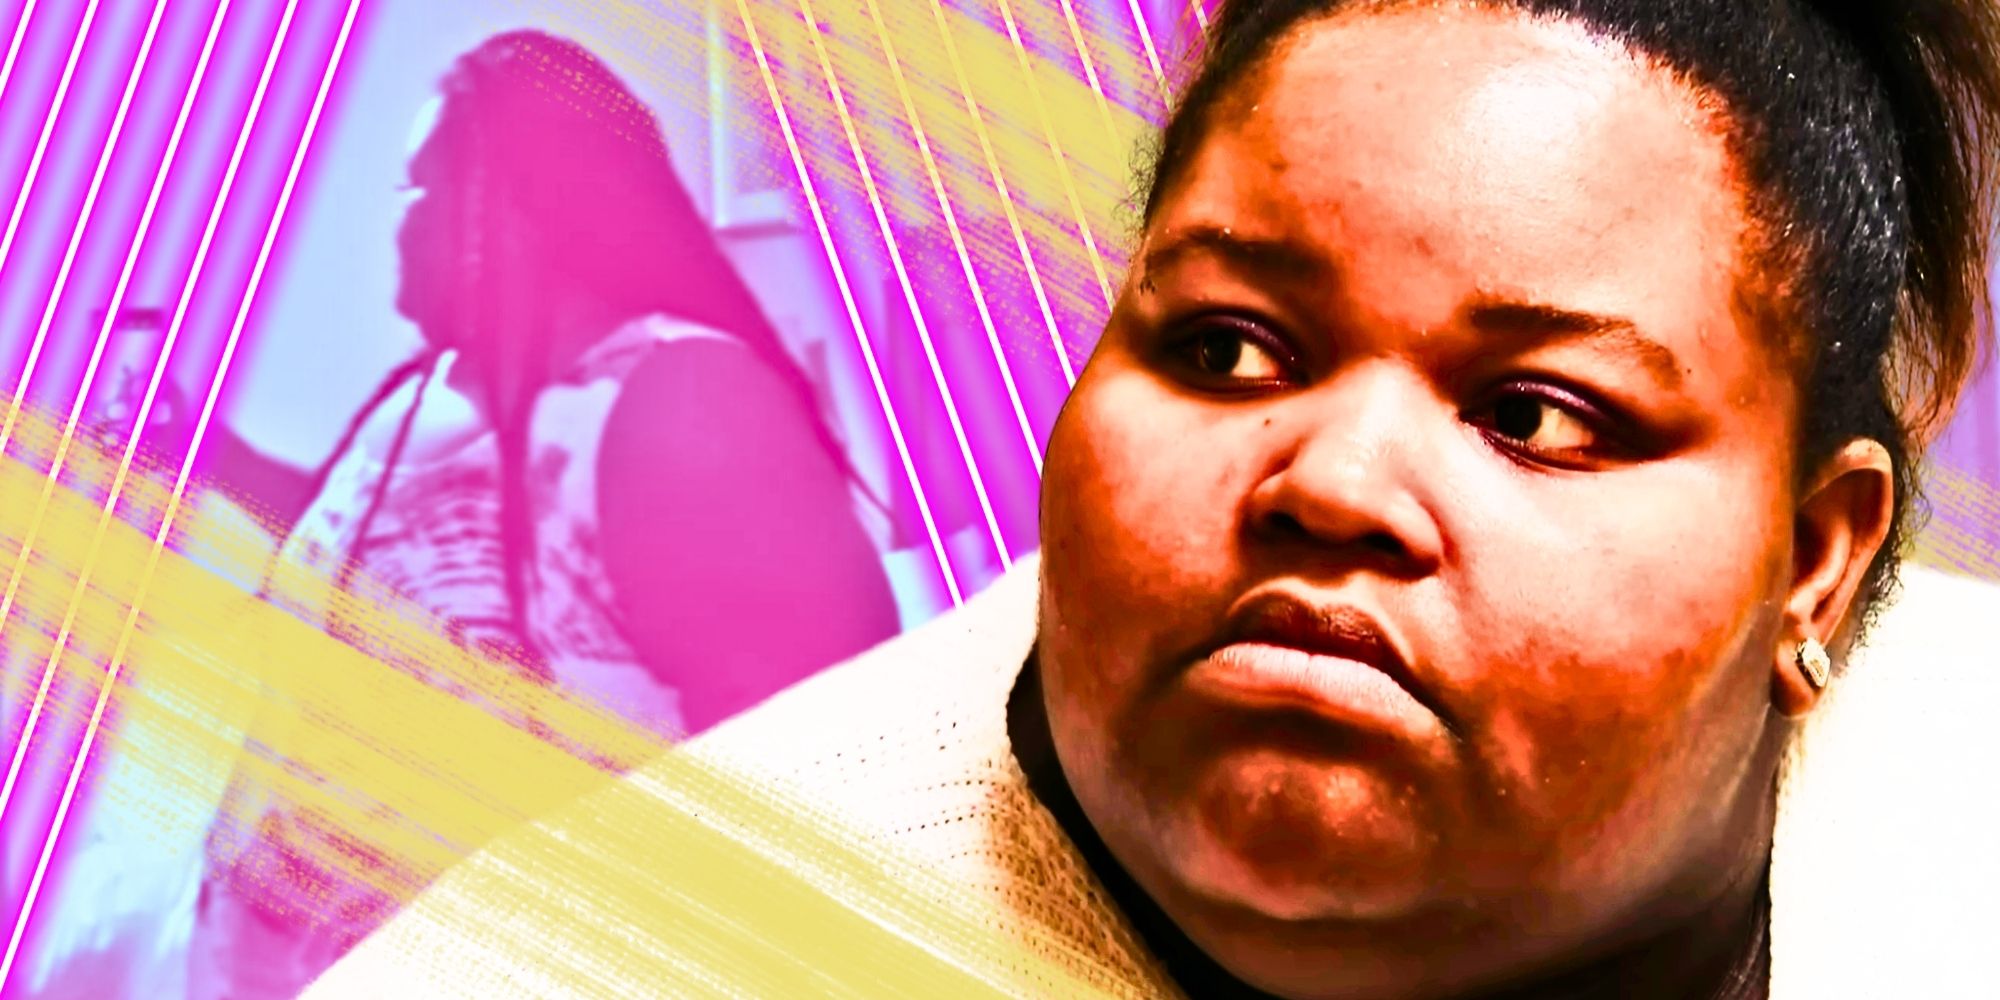  Montage Of Schenee Murry From My 600-Lb Life Season 6